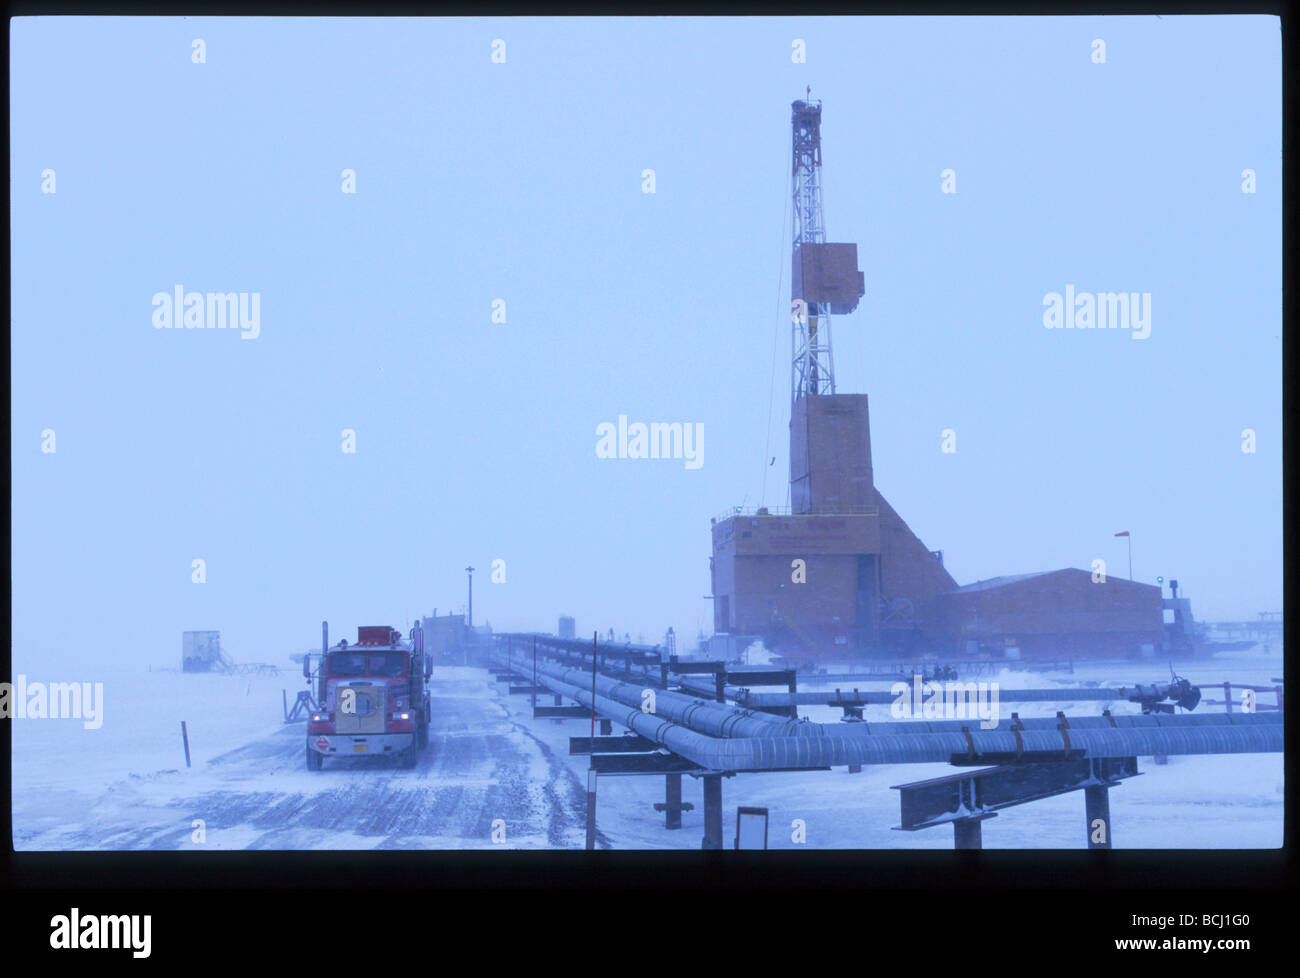 Oil Rig & truck driving on road Prudhoe Bay Arctic AK winter scenic Stock Photo